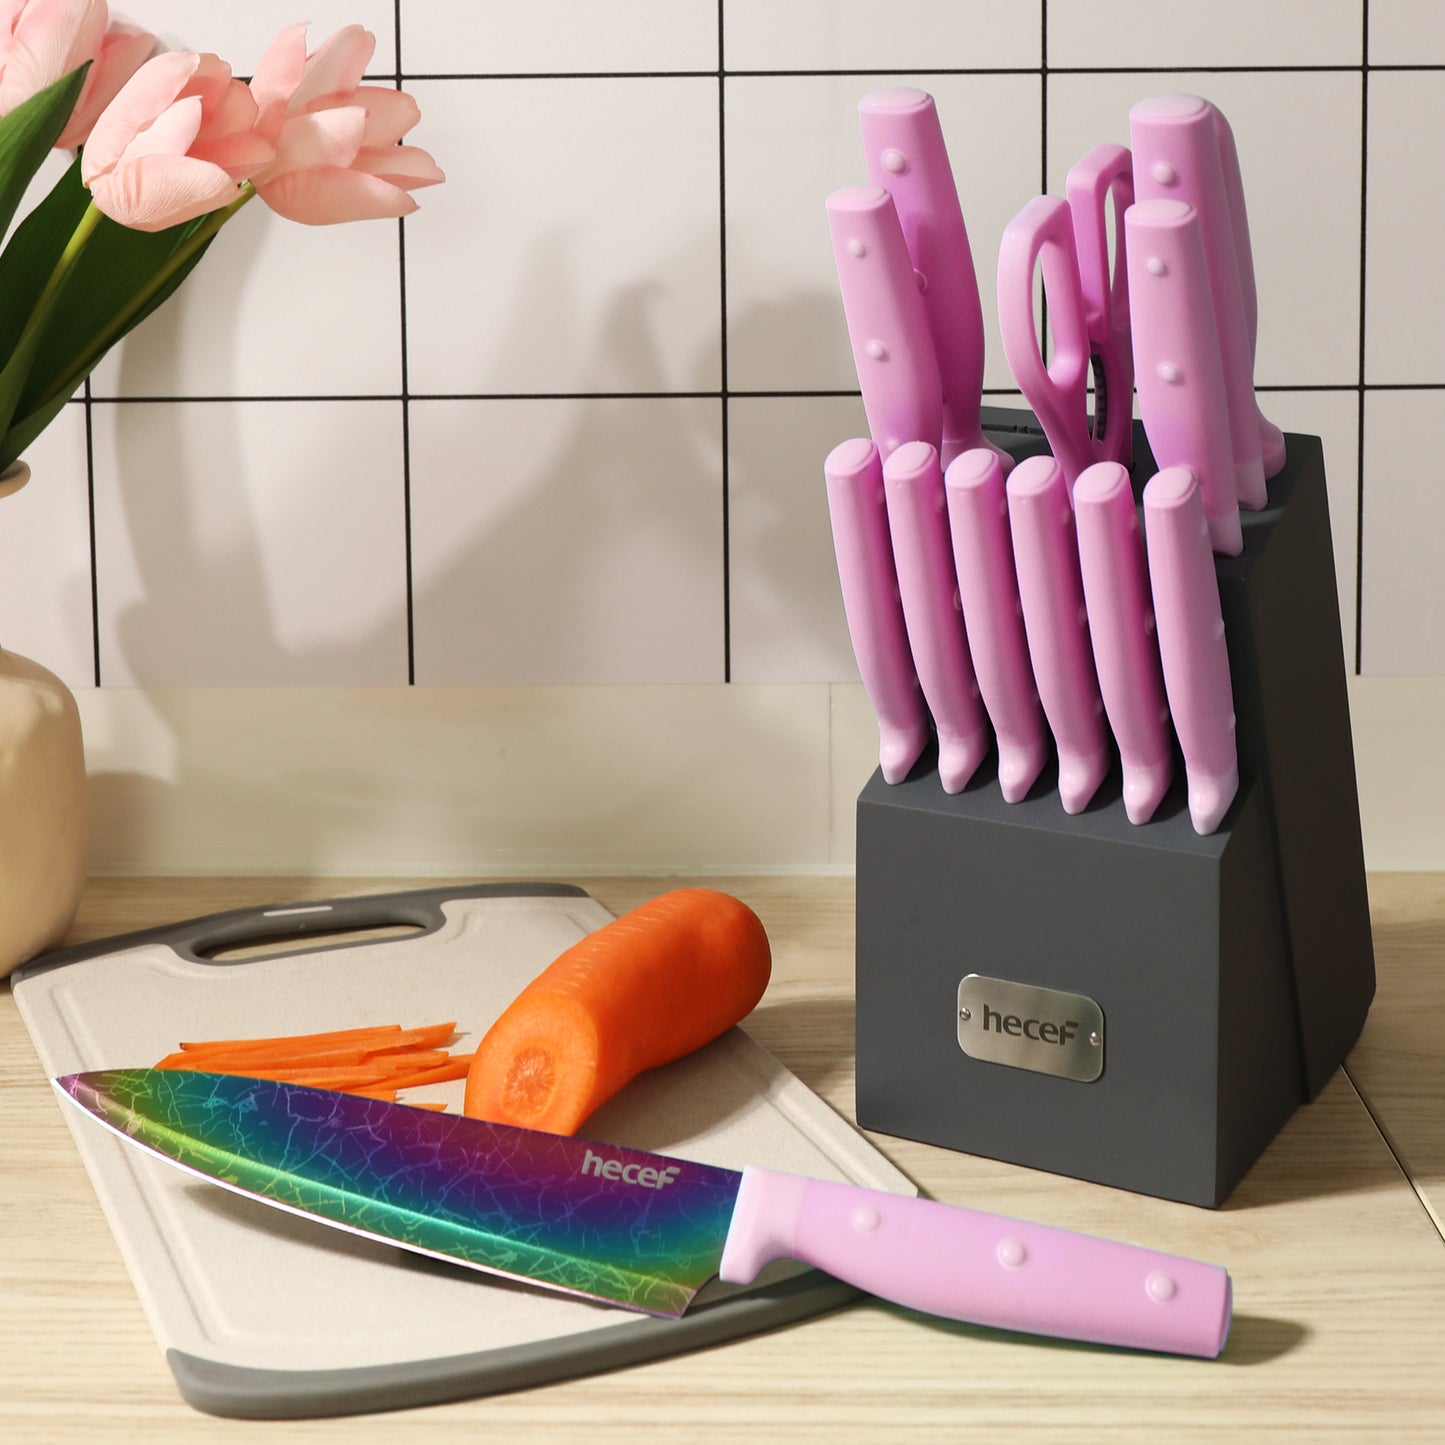 HAUSHOF Kitchen Knife Set, 5 Piece Rainbow Knife Sets with Block, Premium Steel Knives Set for Kitchen with Ergonomic Handle, Great for Slicing